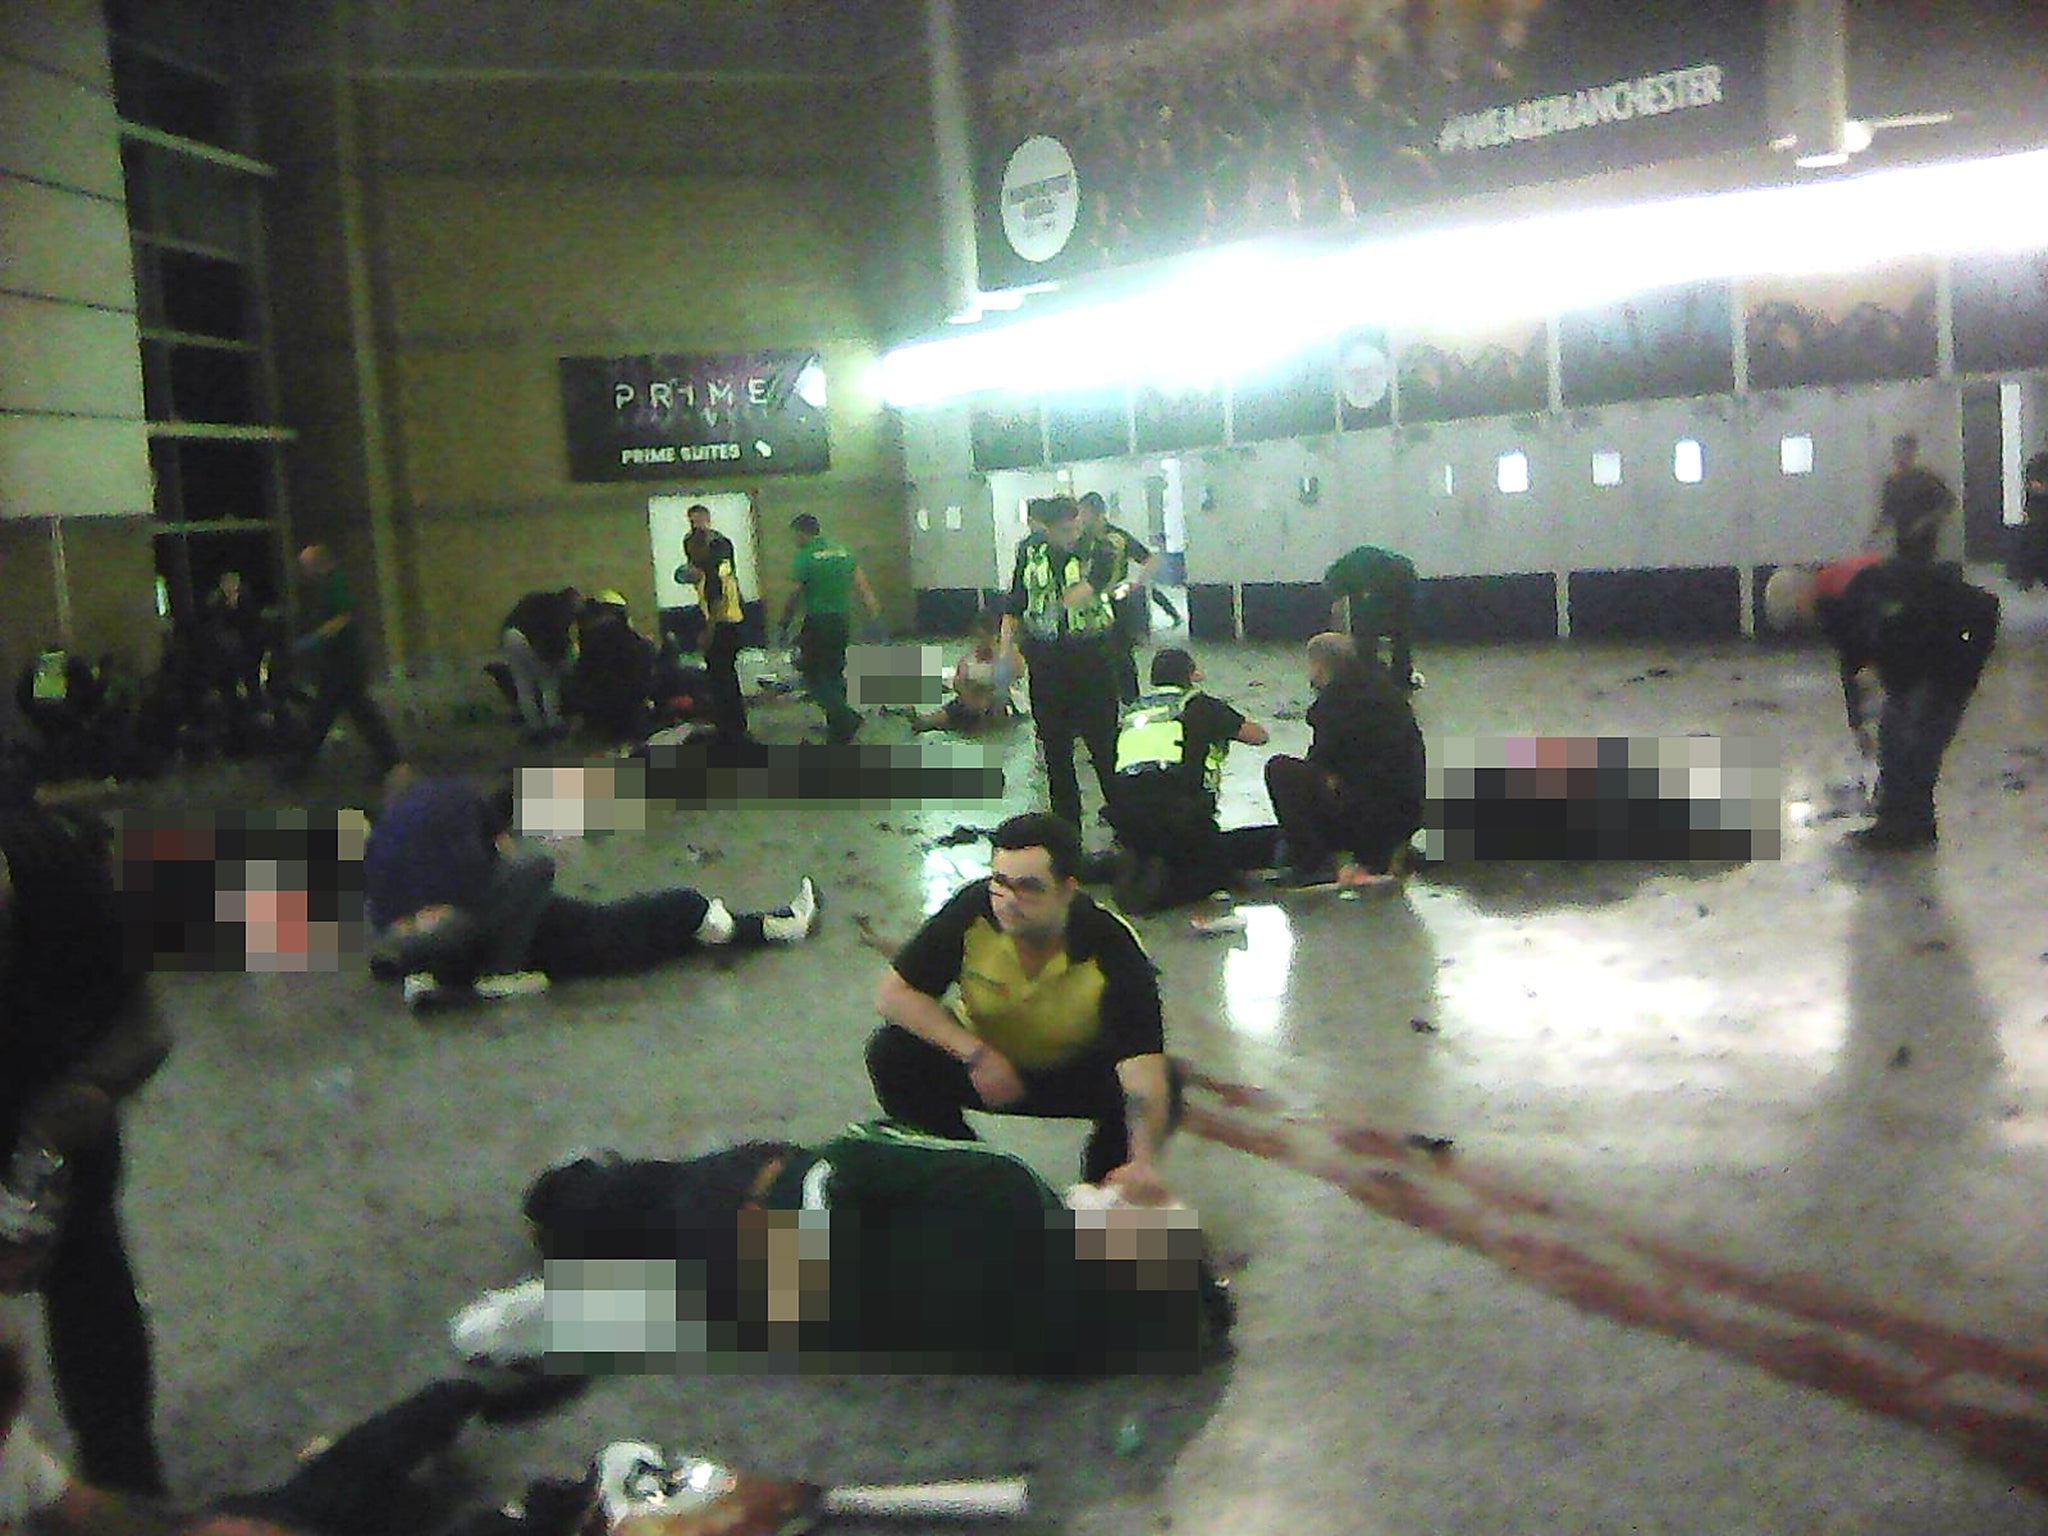 Paramedics attend to casualties inside Manchester Arena after Salman Abedi detonated his bomb